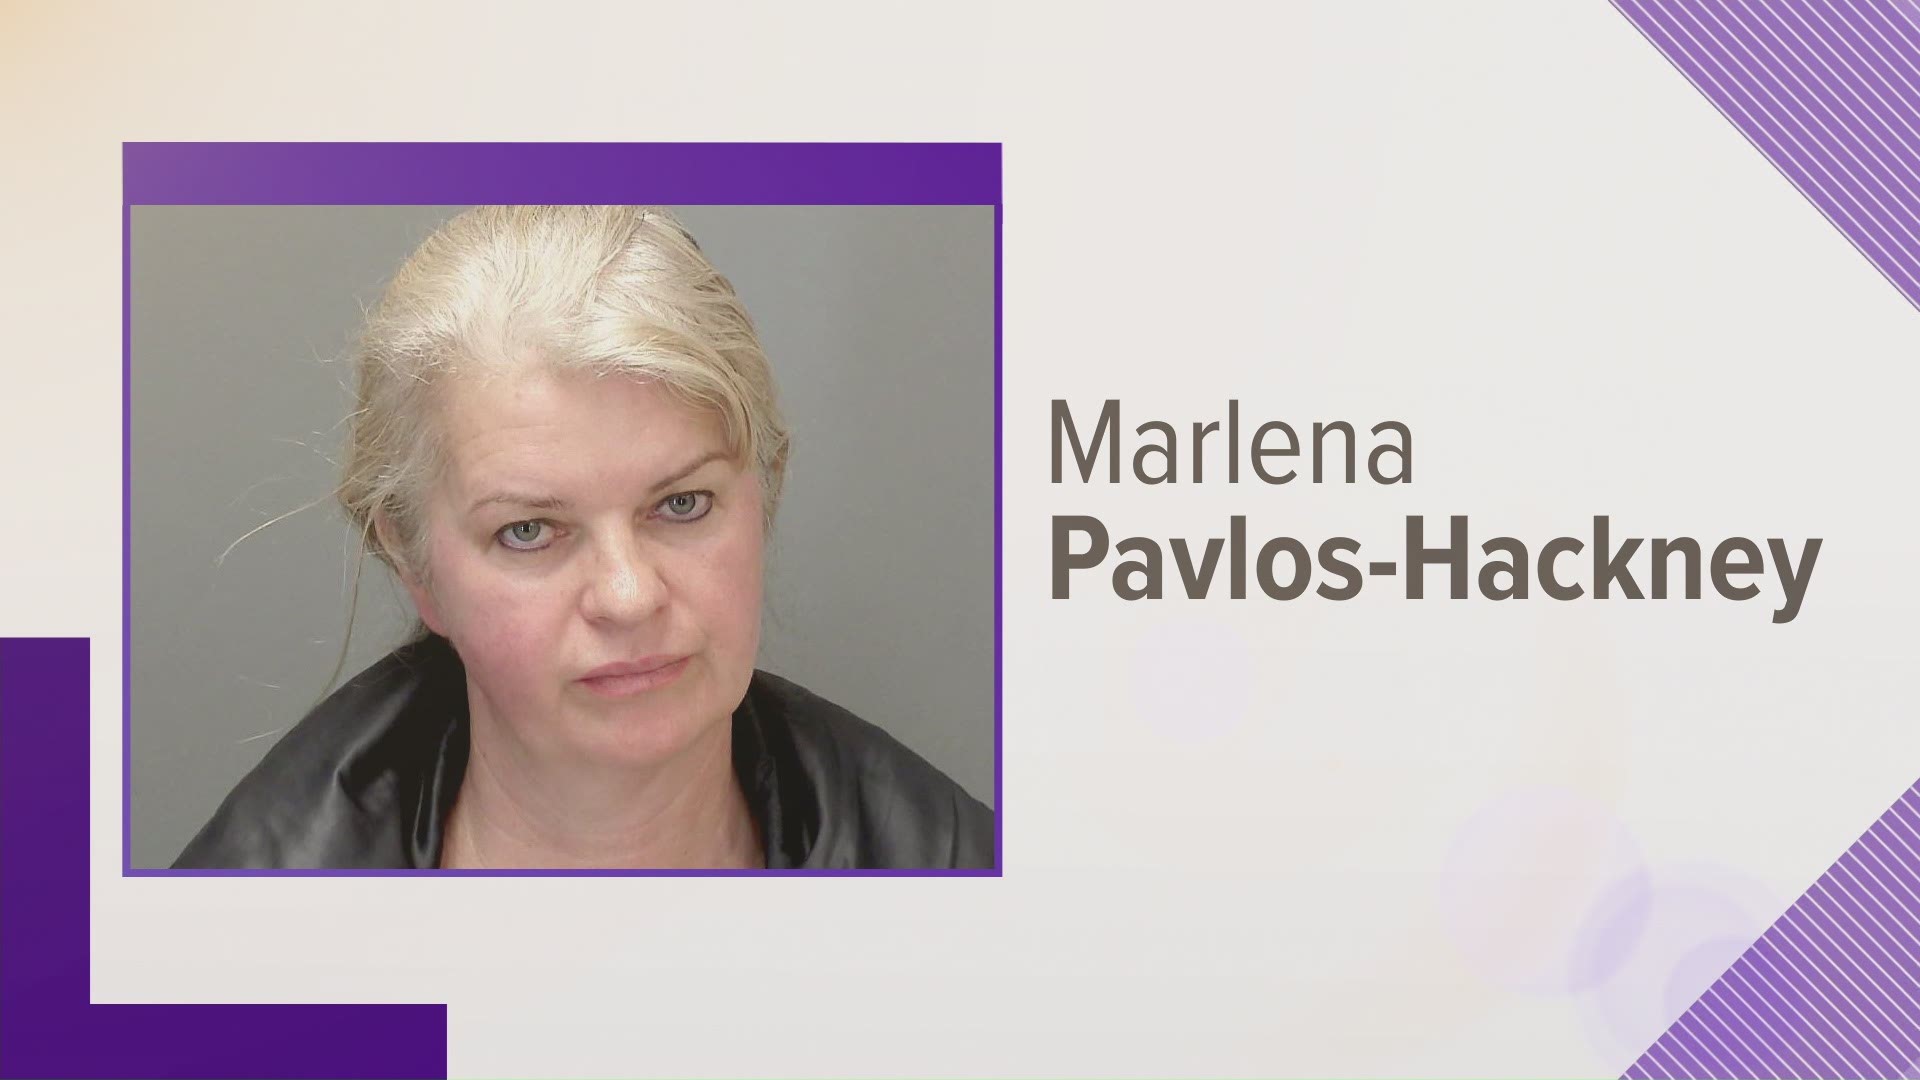 Marlena Pavlos-Hackney was arrested last Friday for continuing to violate the state’s food laws and public health orders.